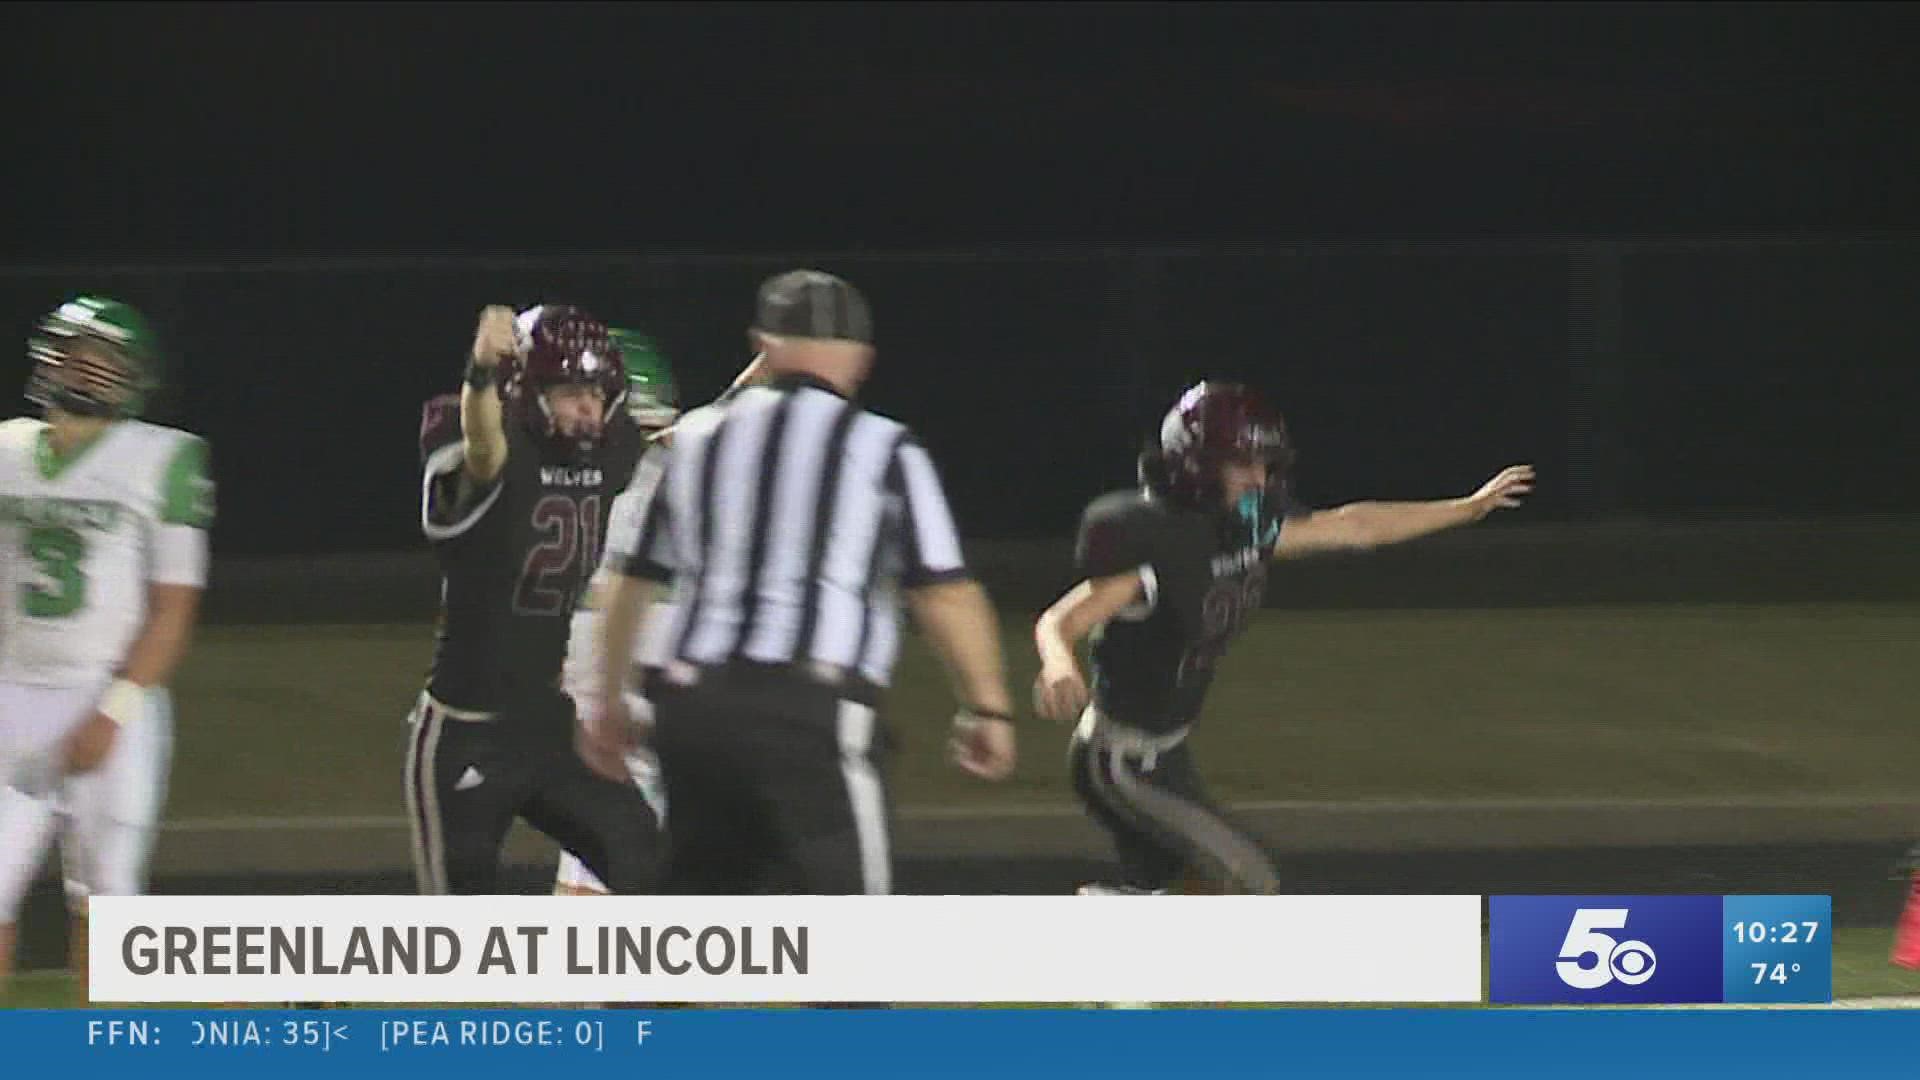 Lincoln wins at home over the pirates.